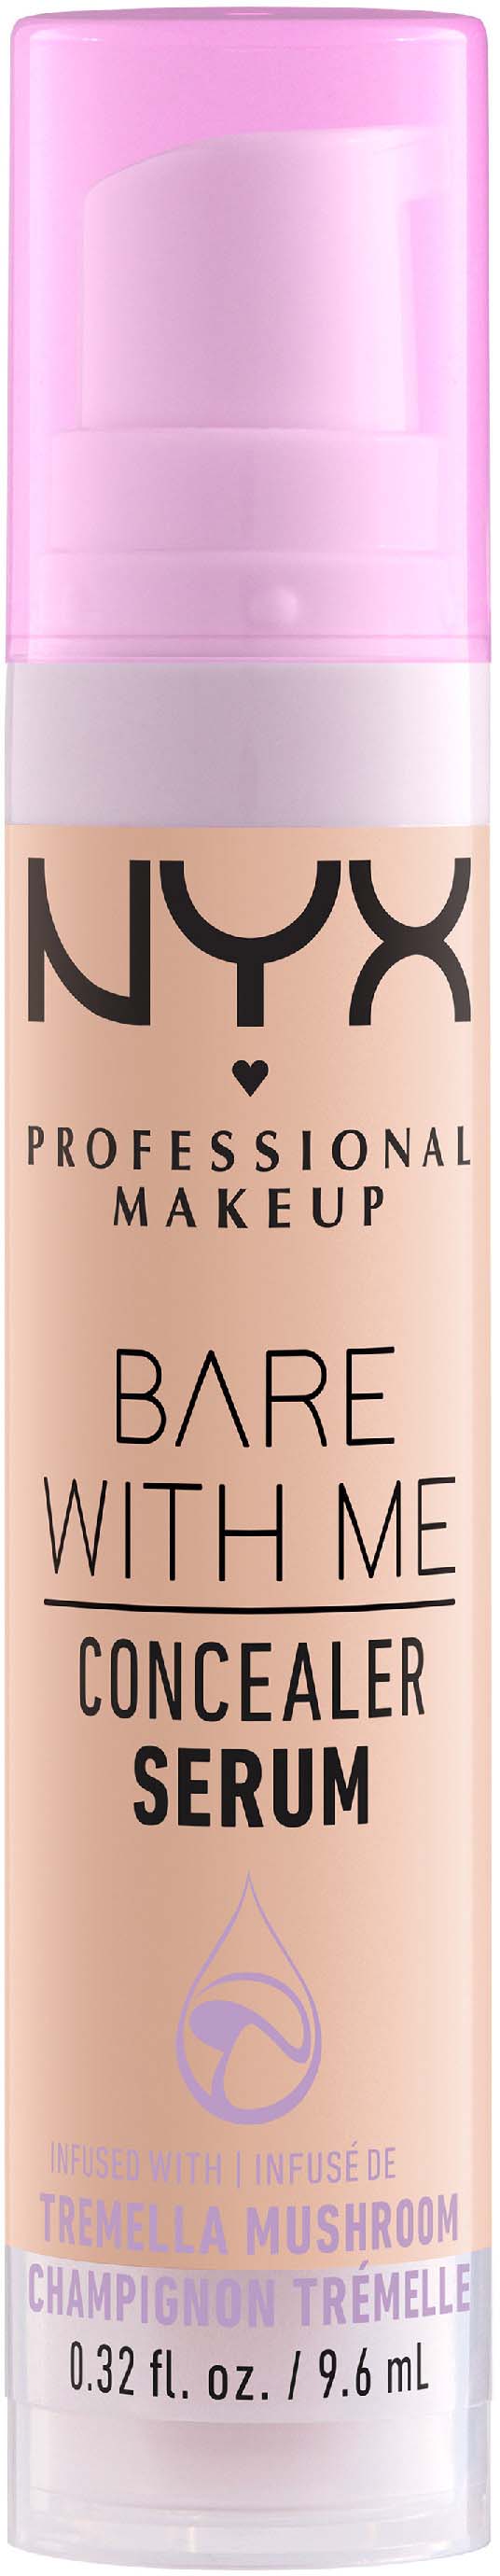 NYX PROFESSIONAL Serum Bare MAKEUP With Concealer Me Light